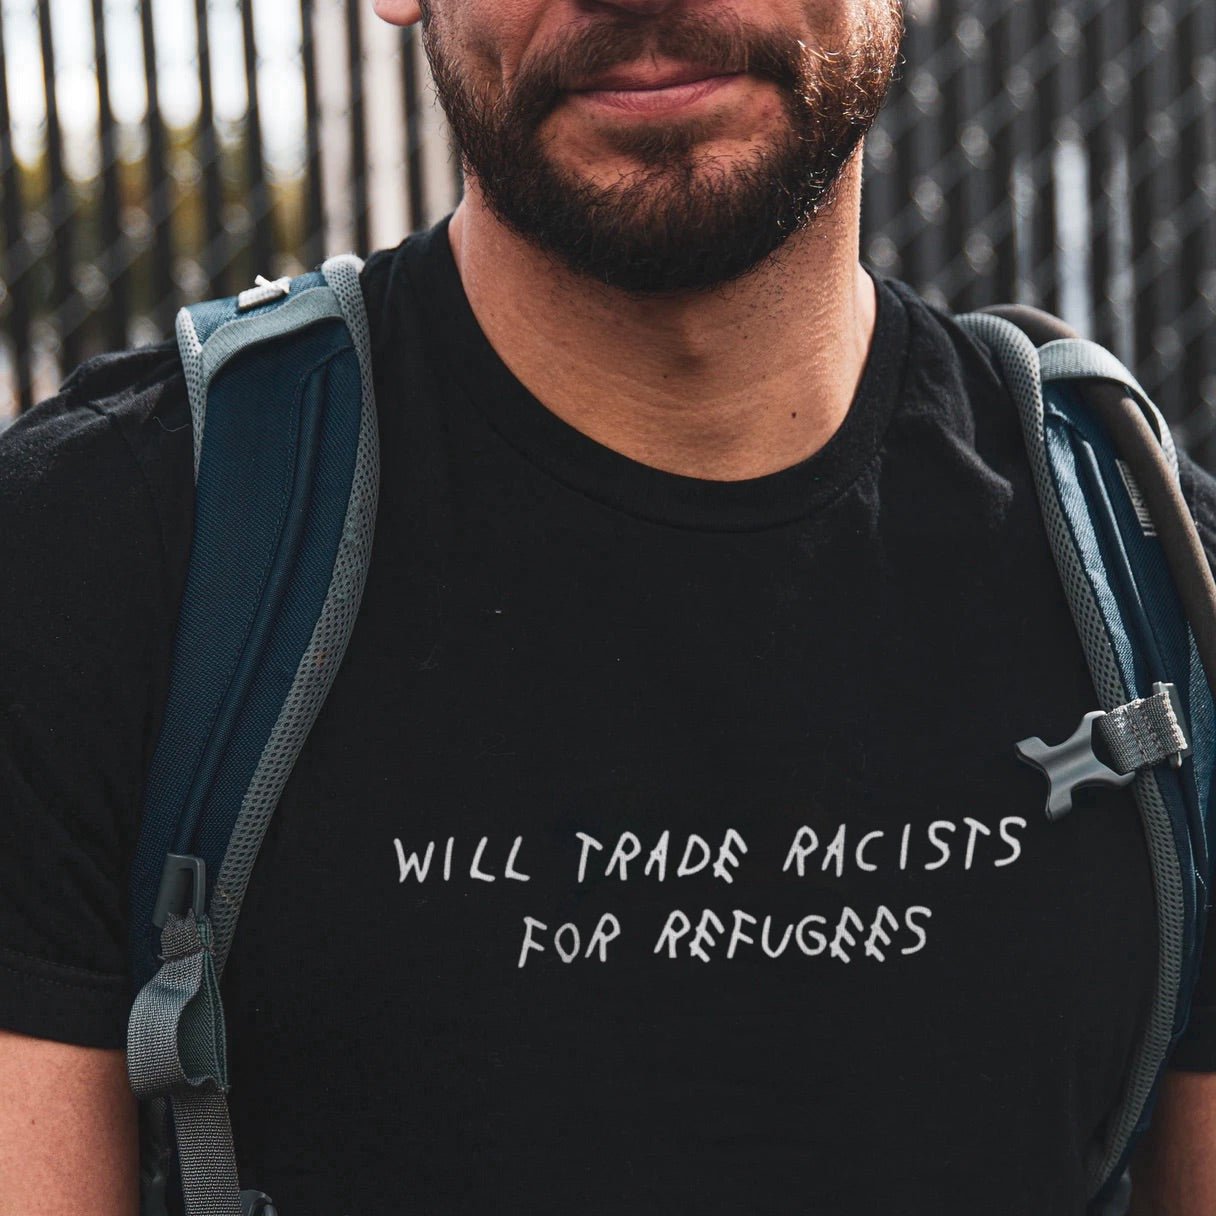 Trade Racists For Refugees Tee Wear The Peace Short Sleeves Black S